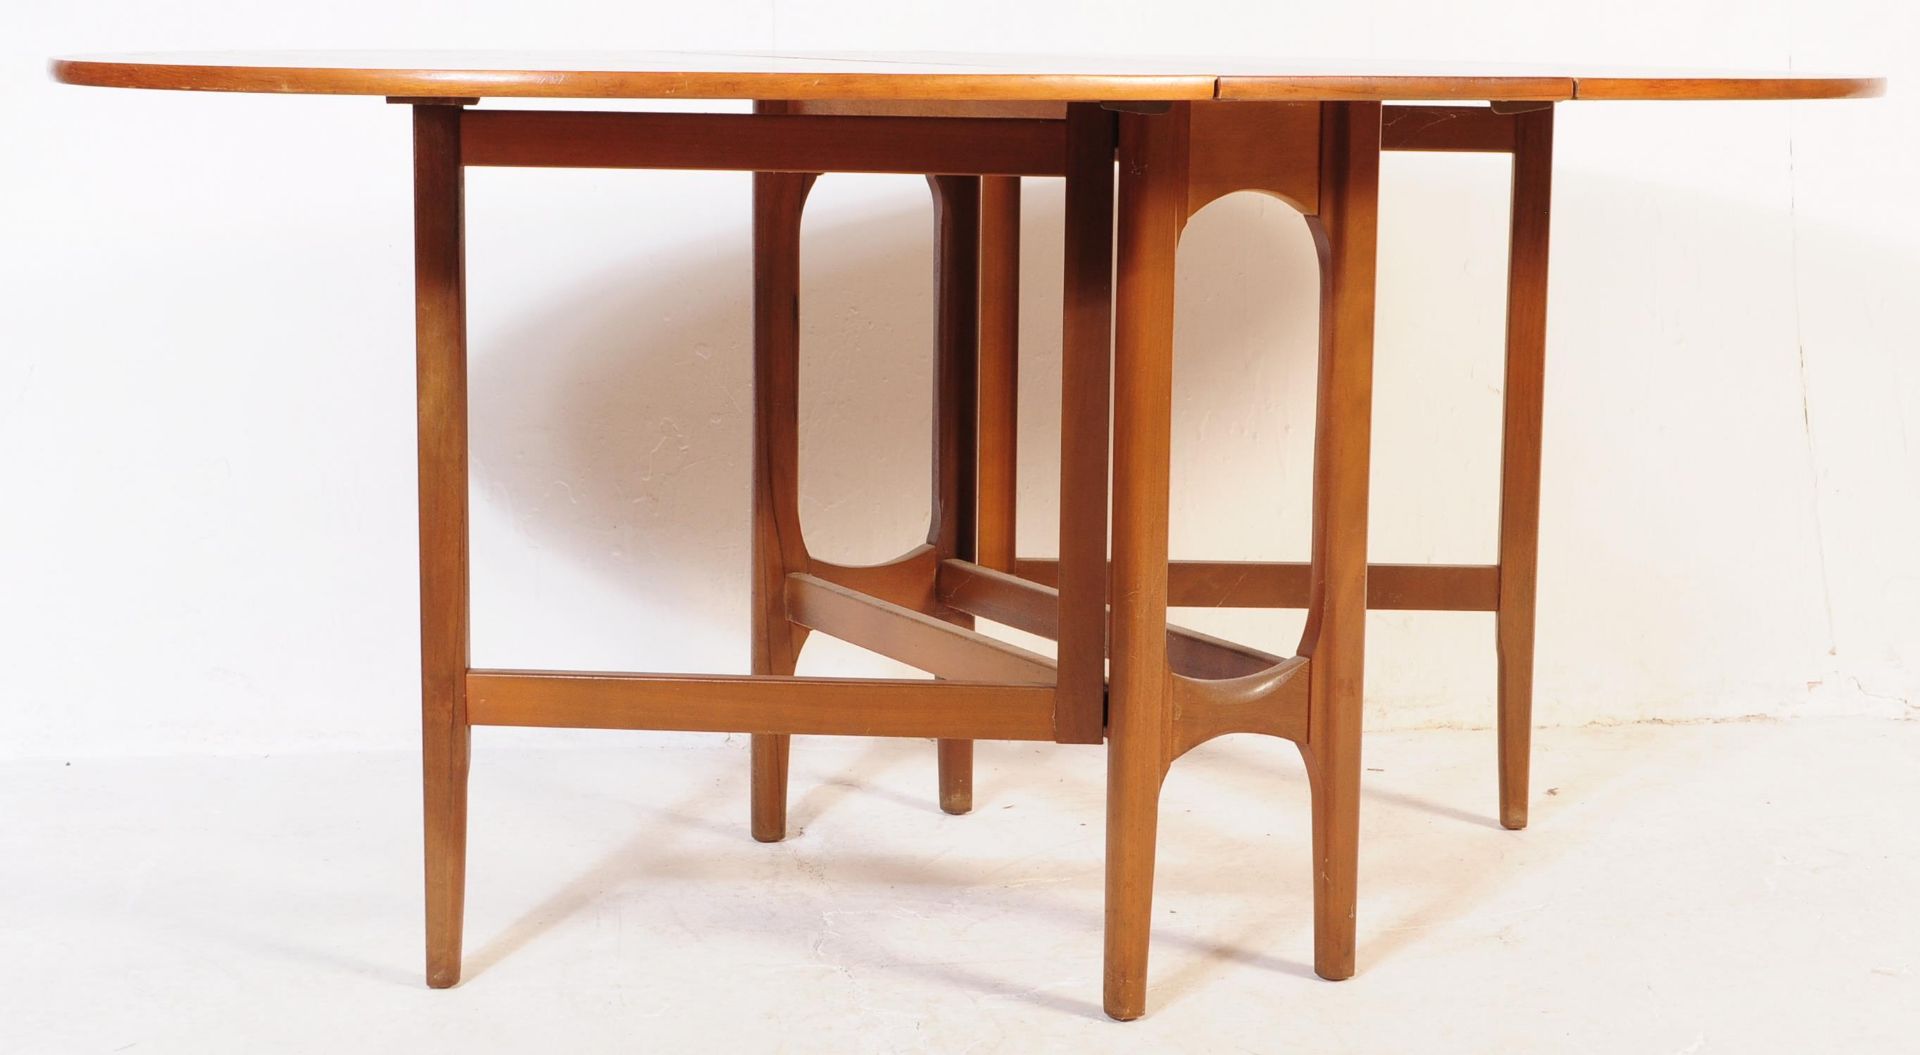 MID 20TH CENTURY RETRO NATHAN DROP LEAF DINING TABLE